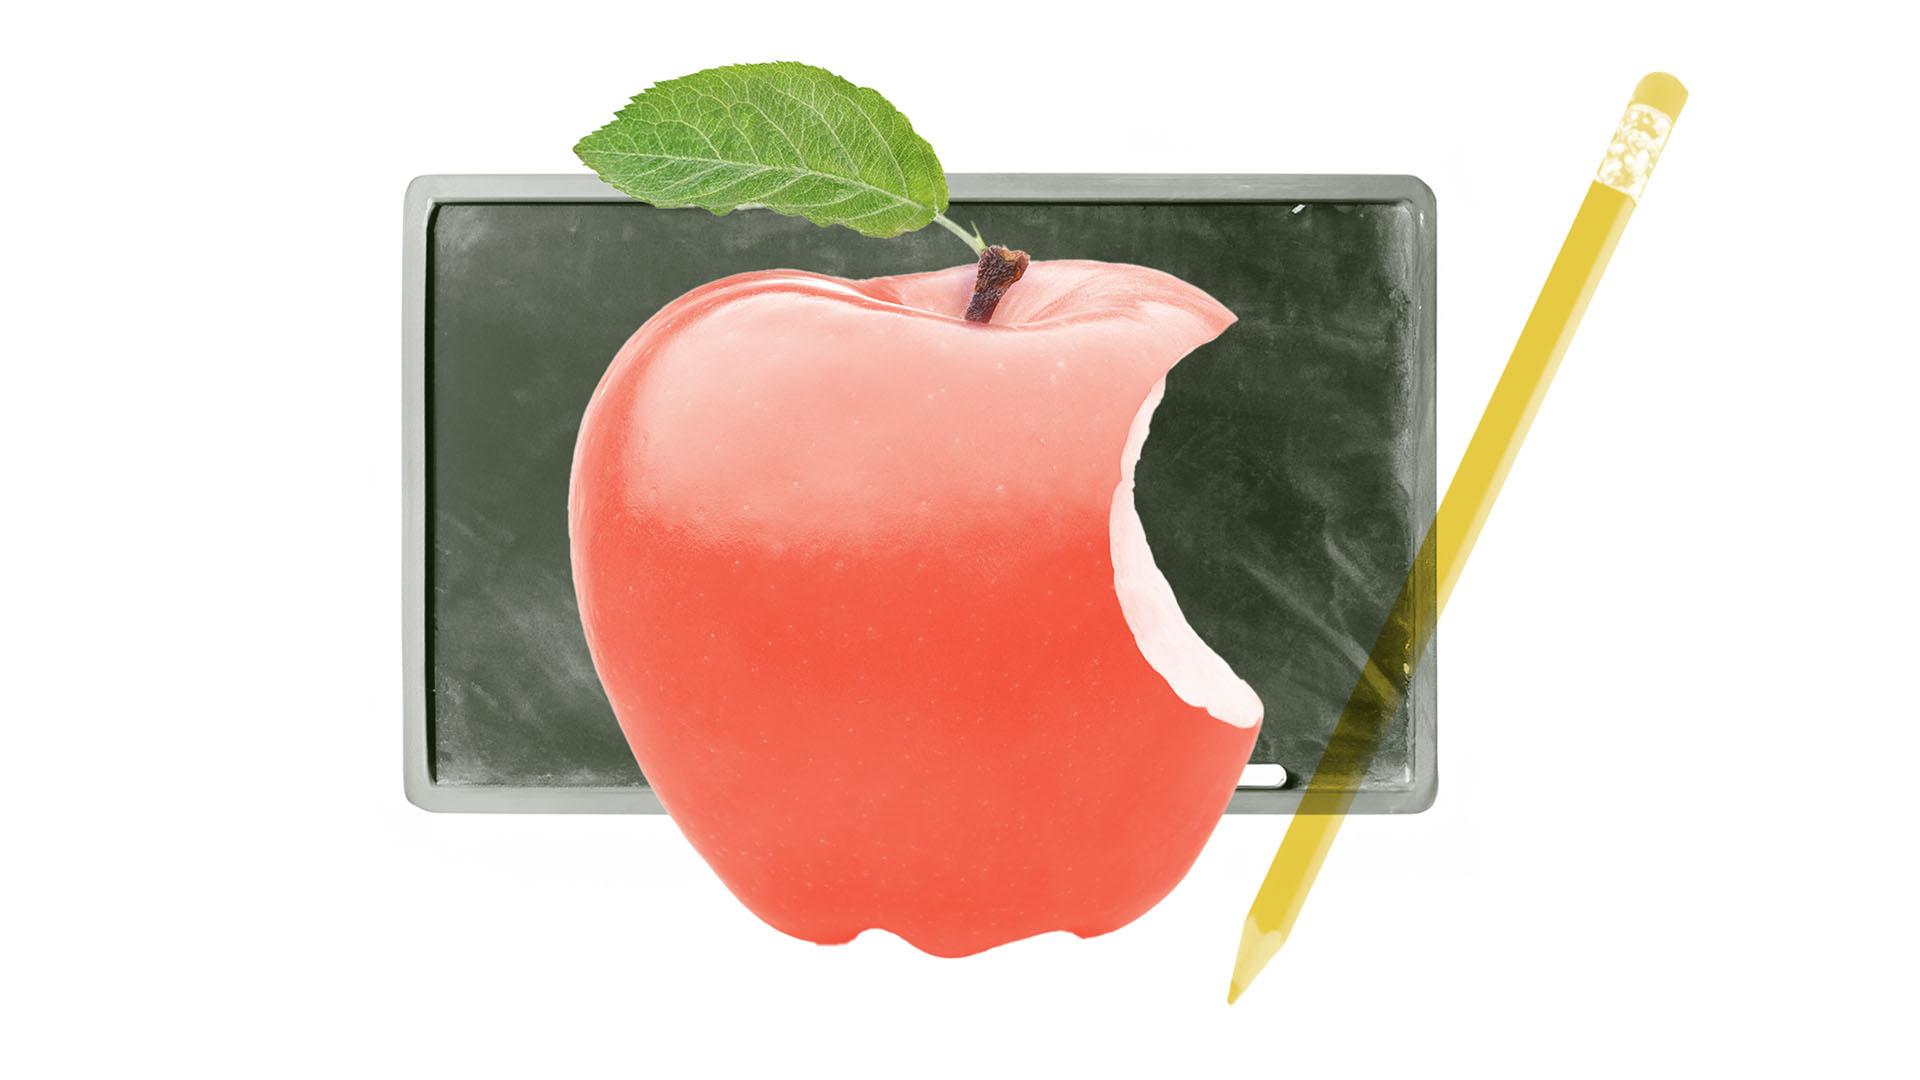 Where Did The Tradition Of Giving Apples To Teachers Come From?